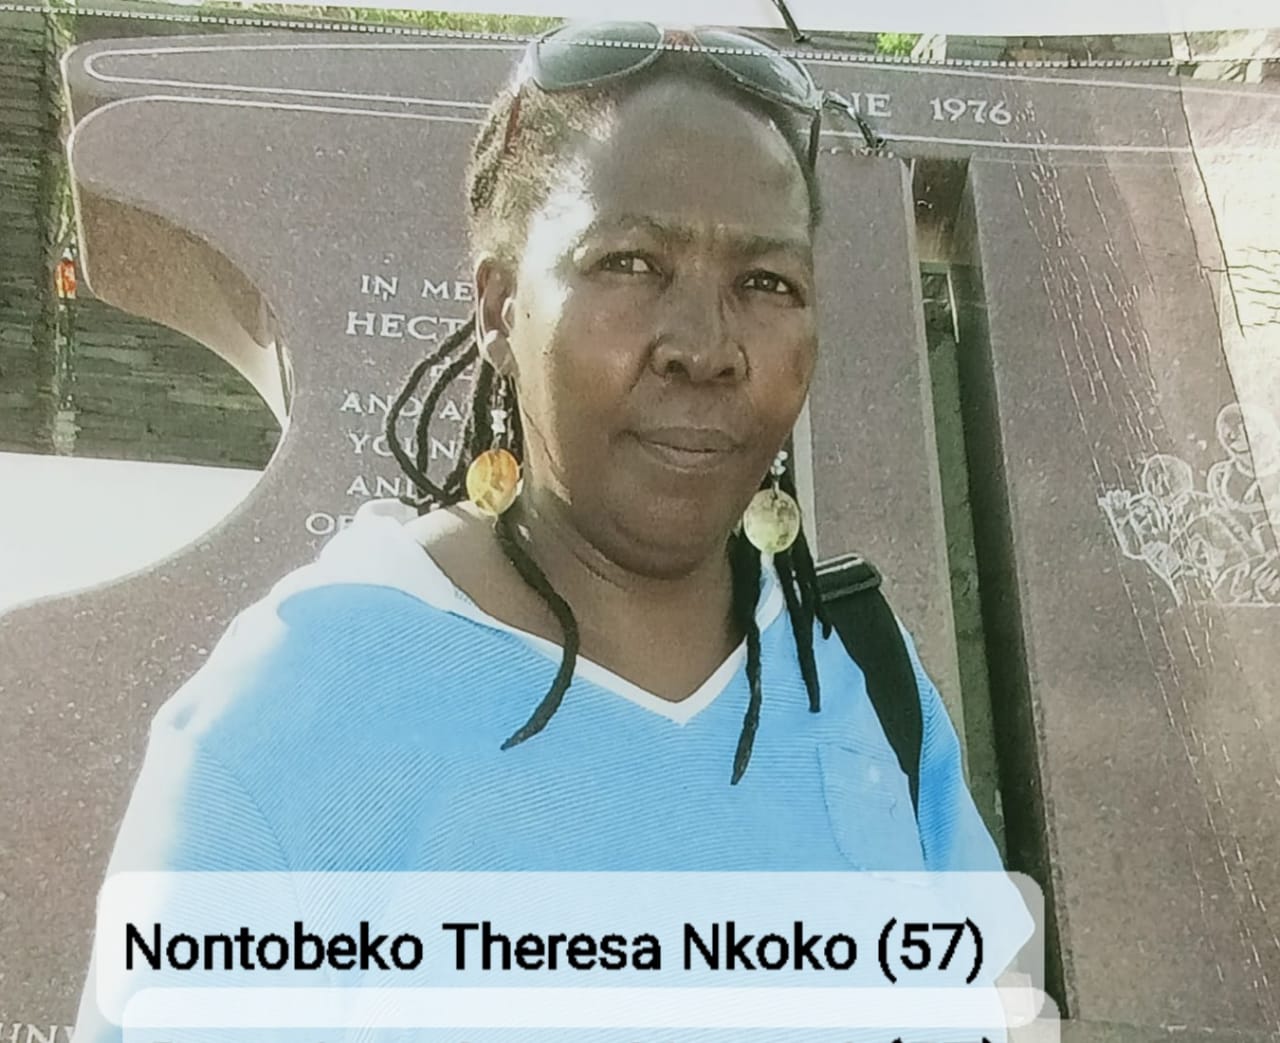 Police request community members to assist reunite Nontobeko Theresa Nkoko (57) with her family